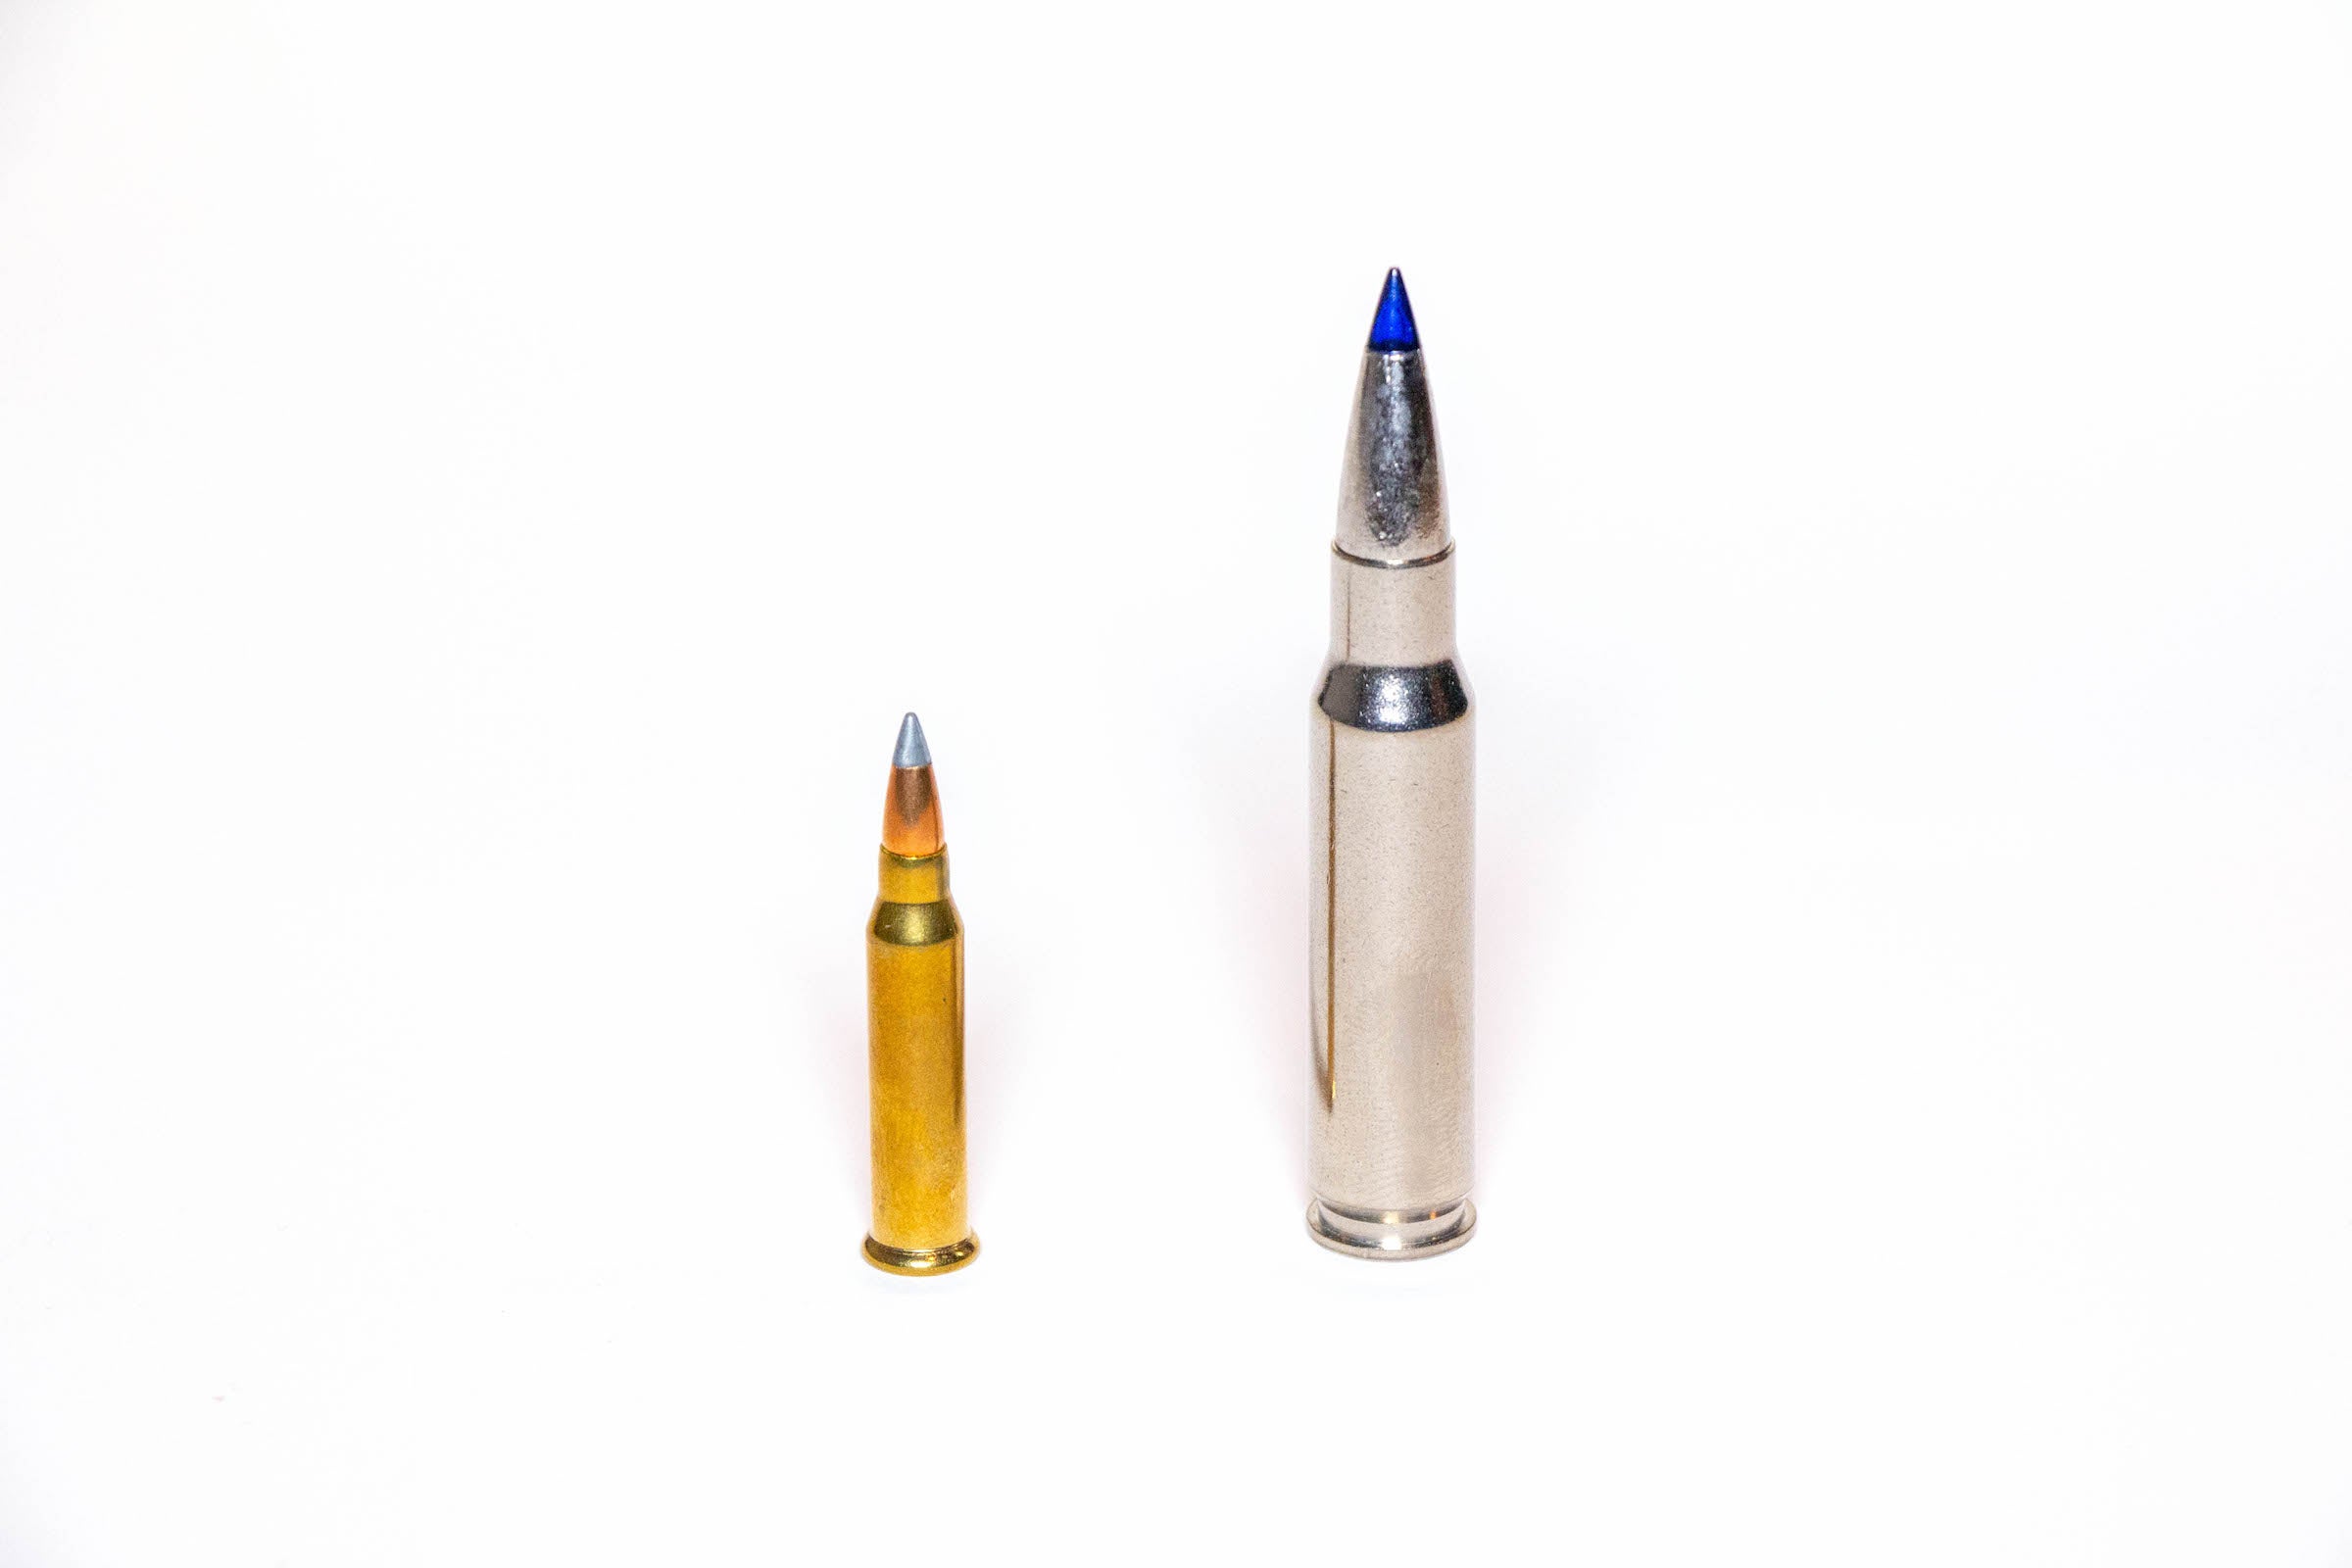 How fast does a bullet travel: Two rifle cartridges.